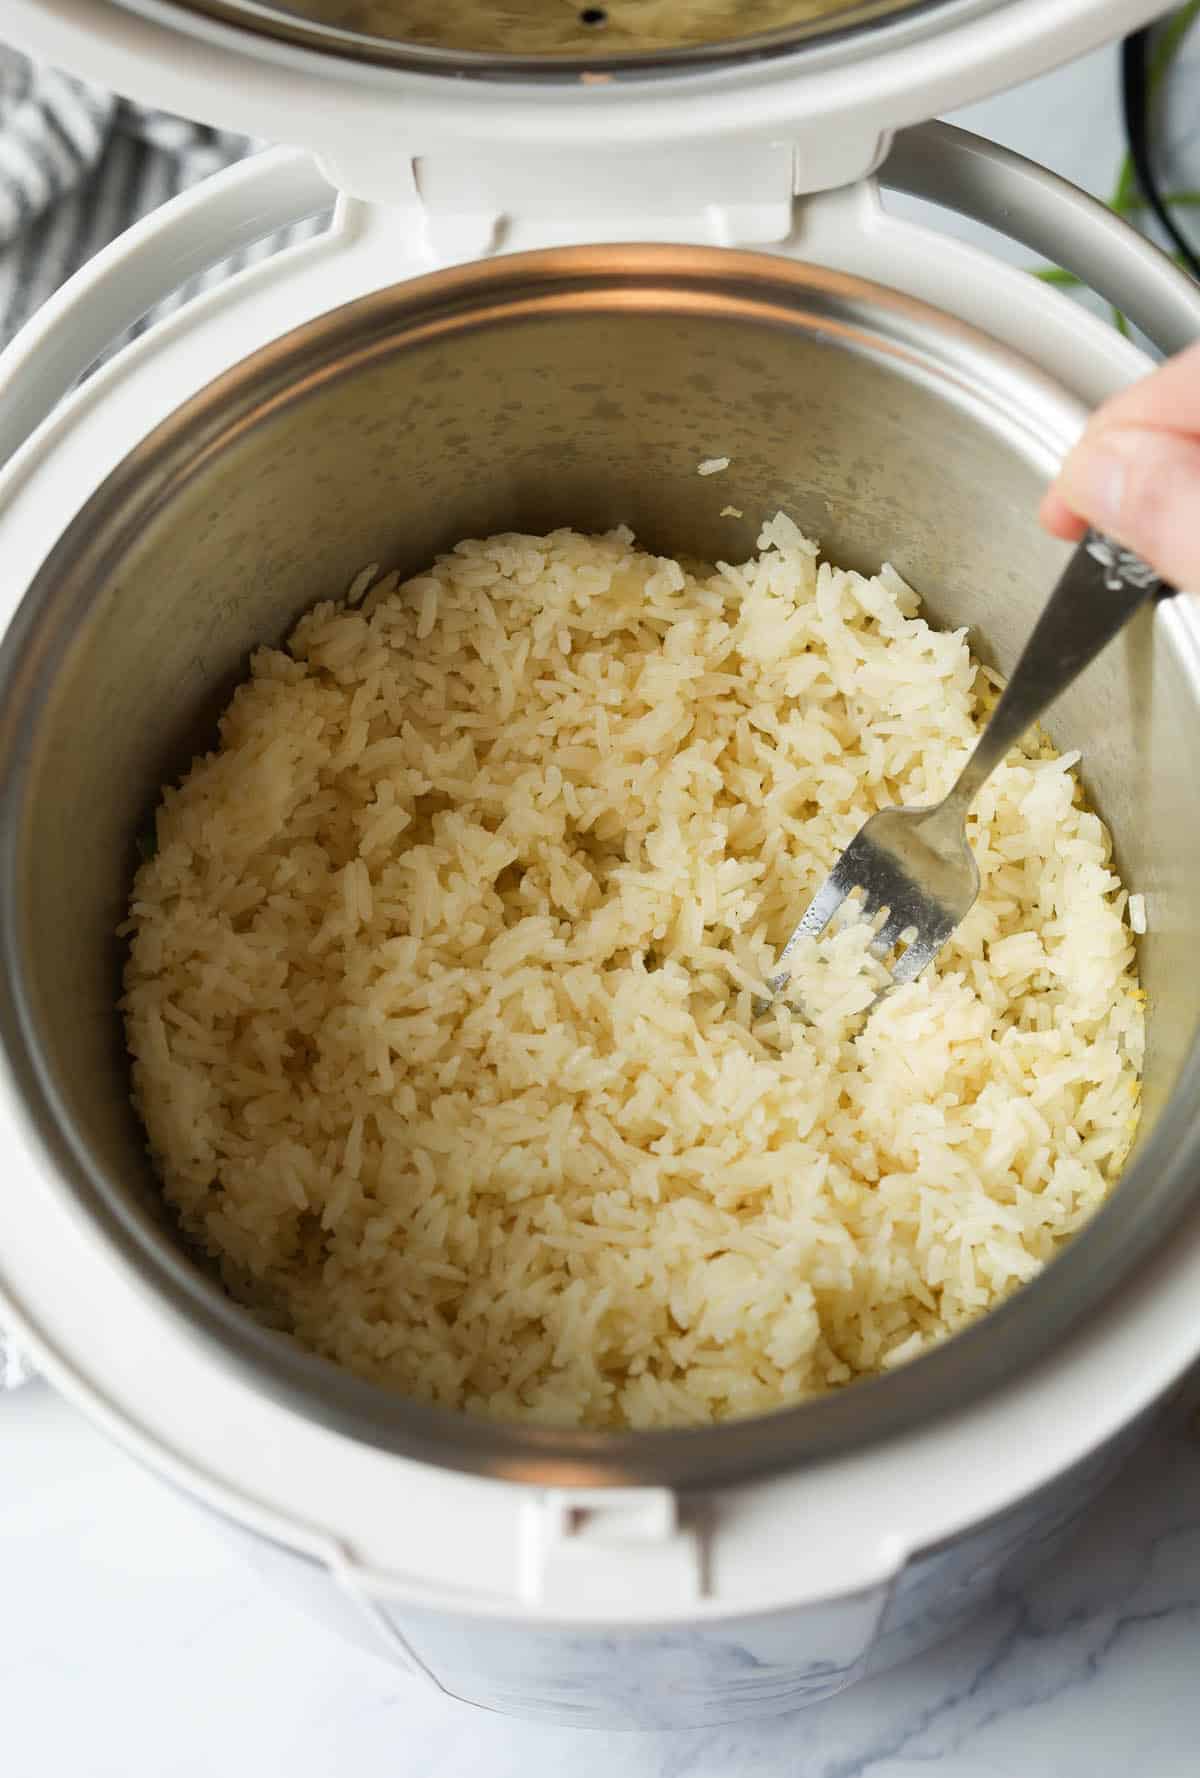 Fluffing rice with fork in rice cooker.